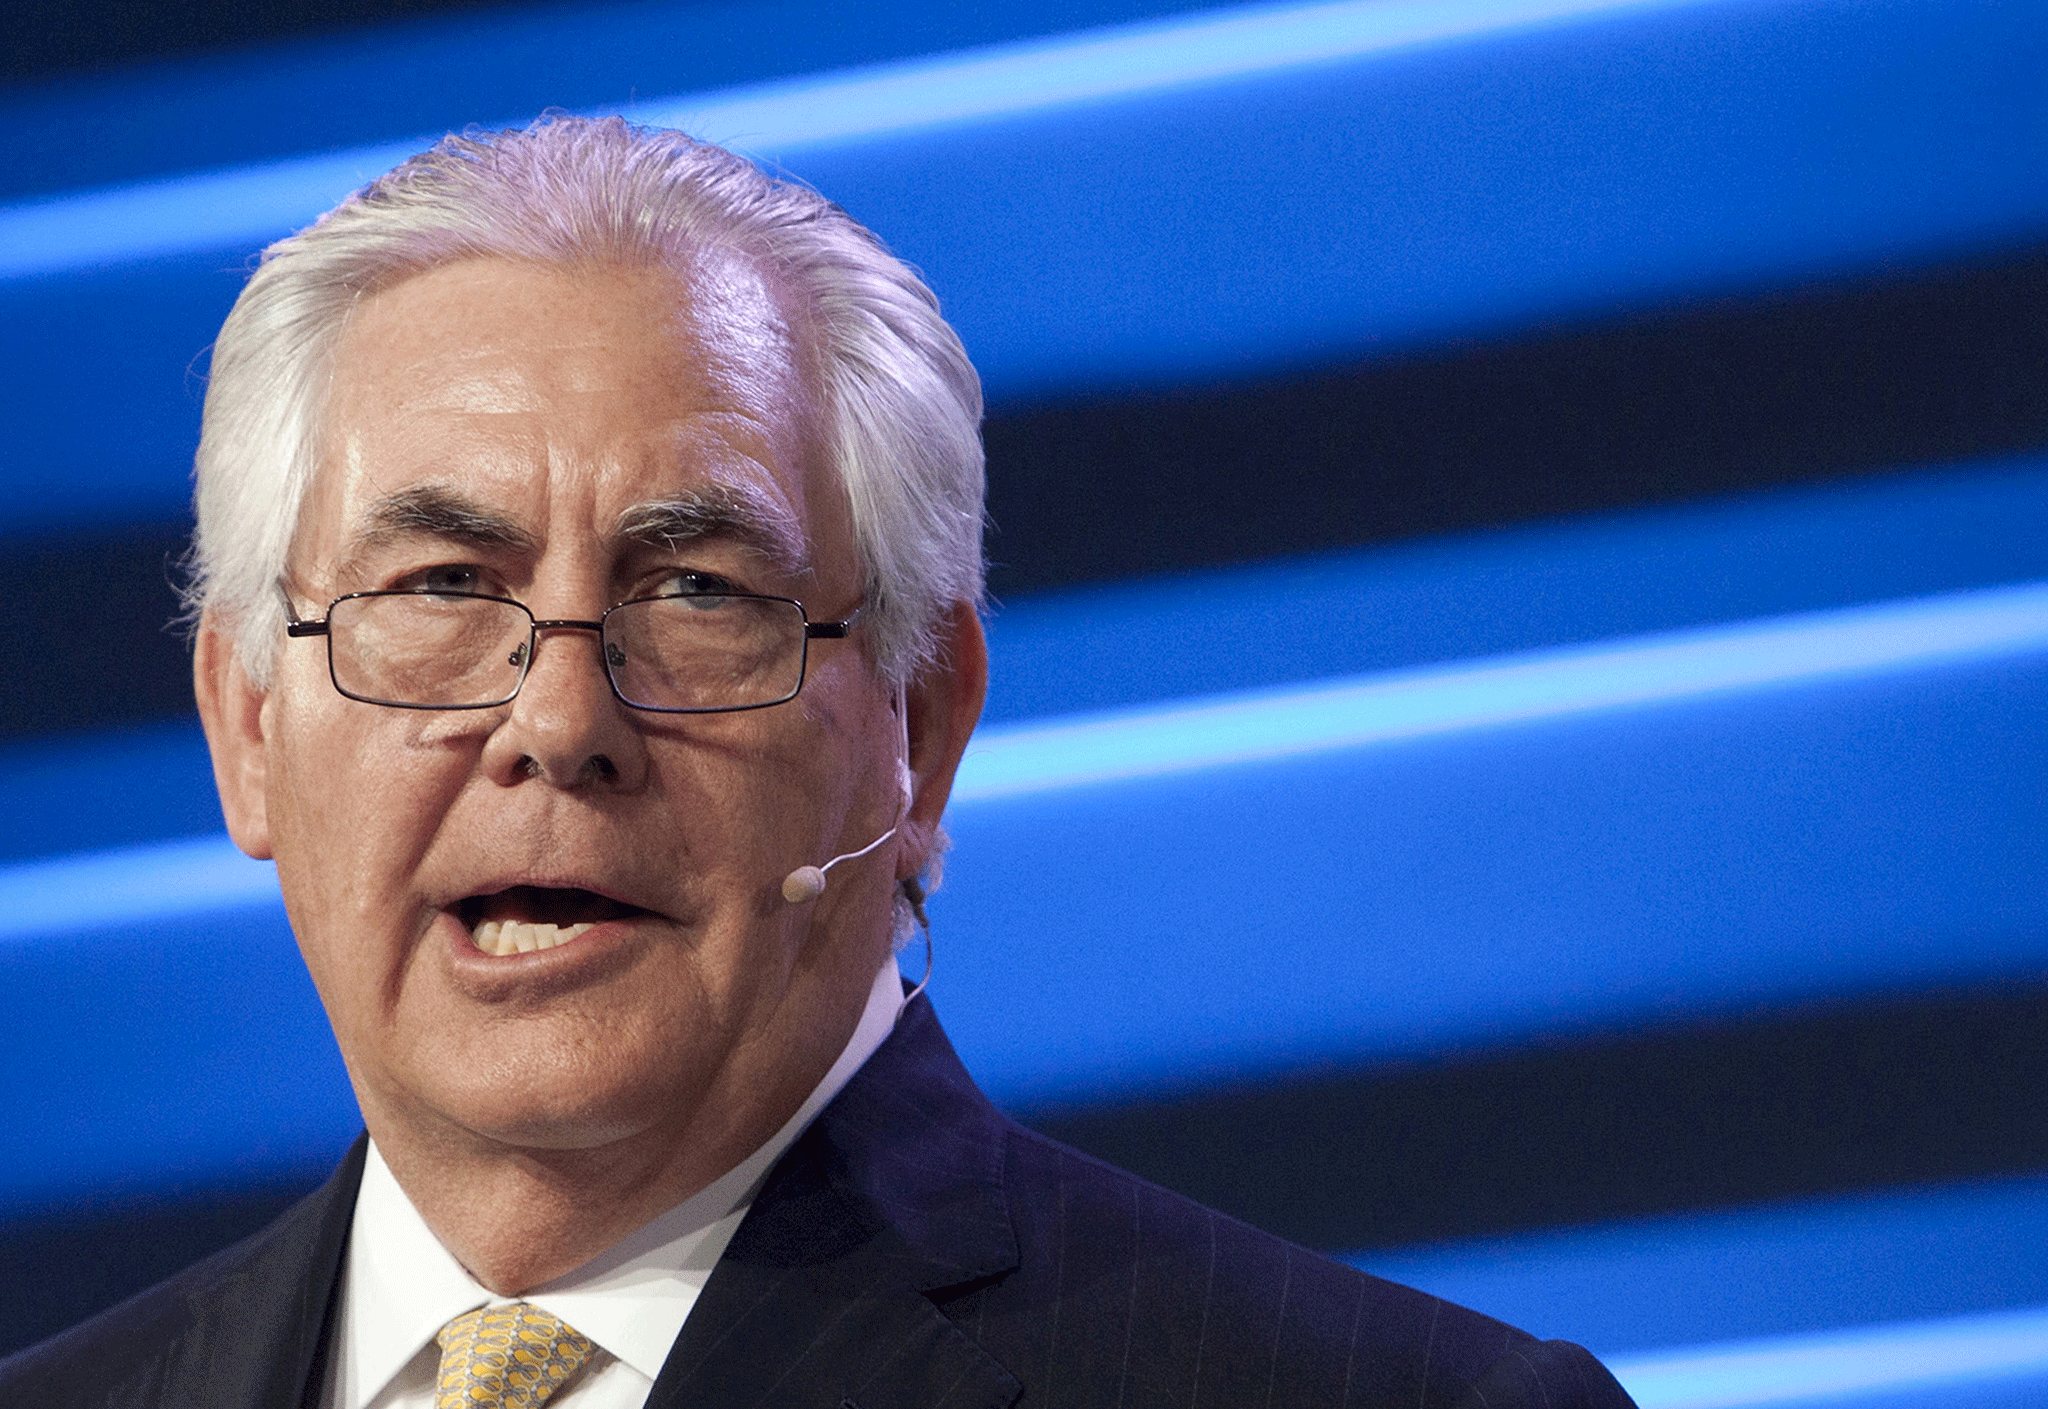 Donald Trump's Secretary of State did business with Iran and Syria